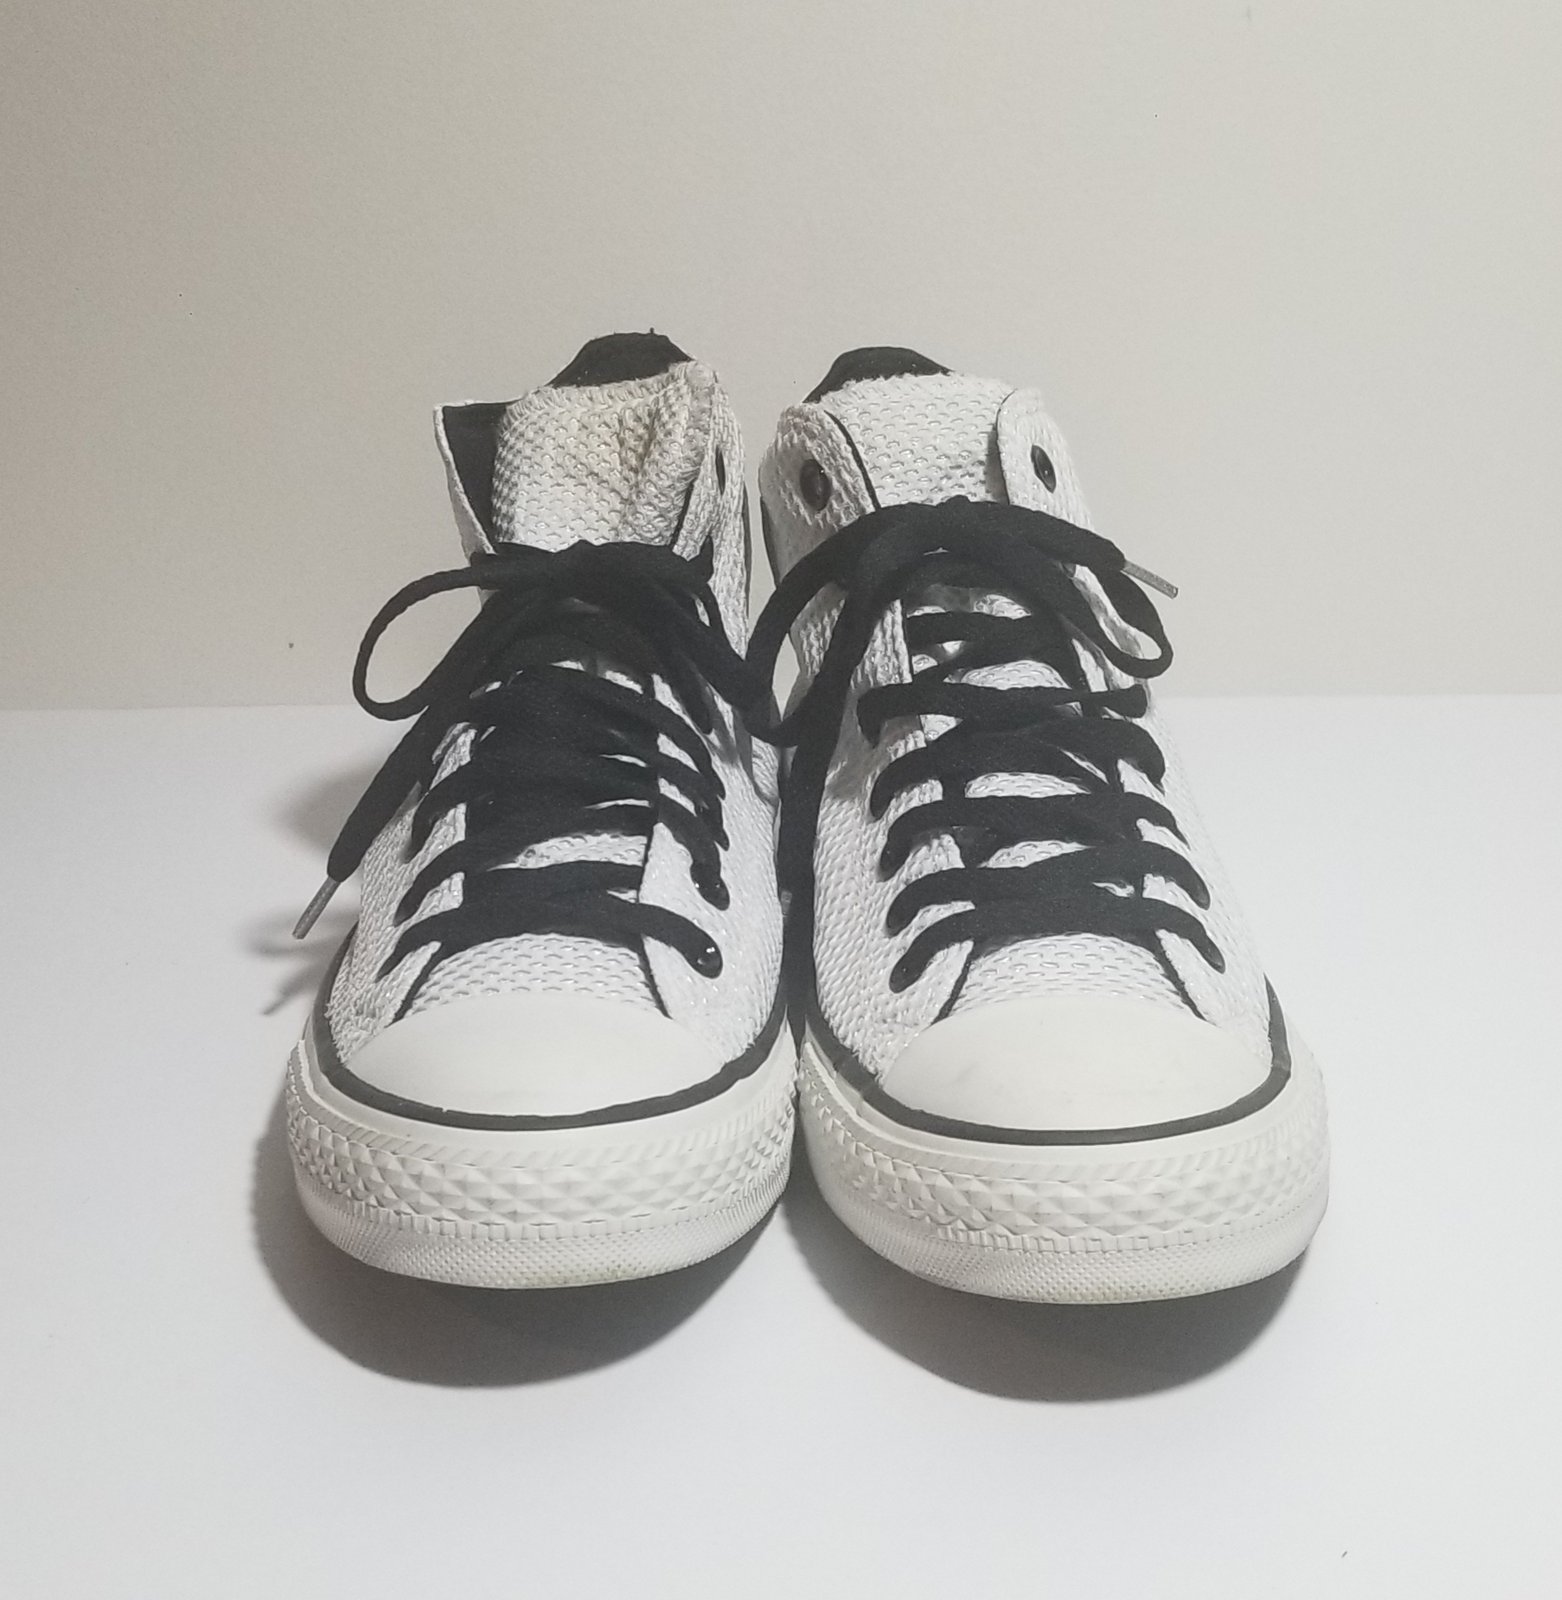 converse all star size 8